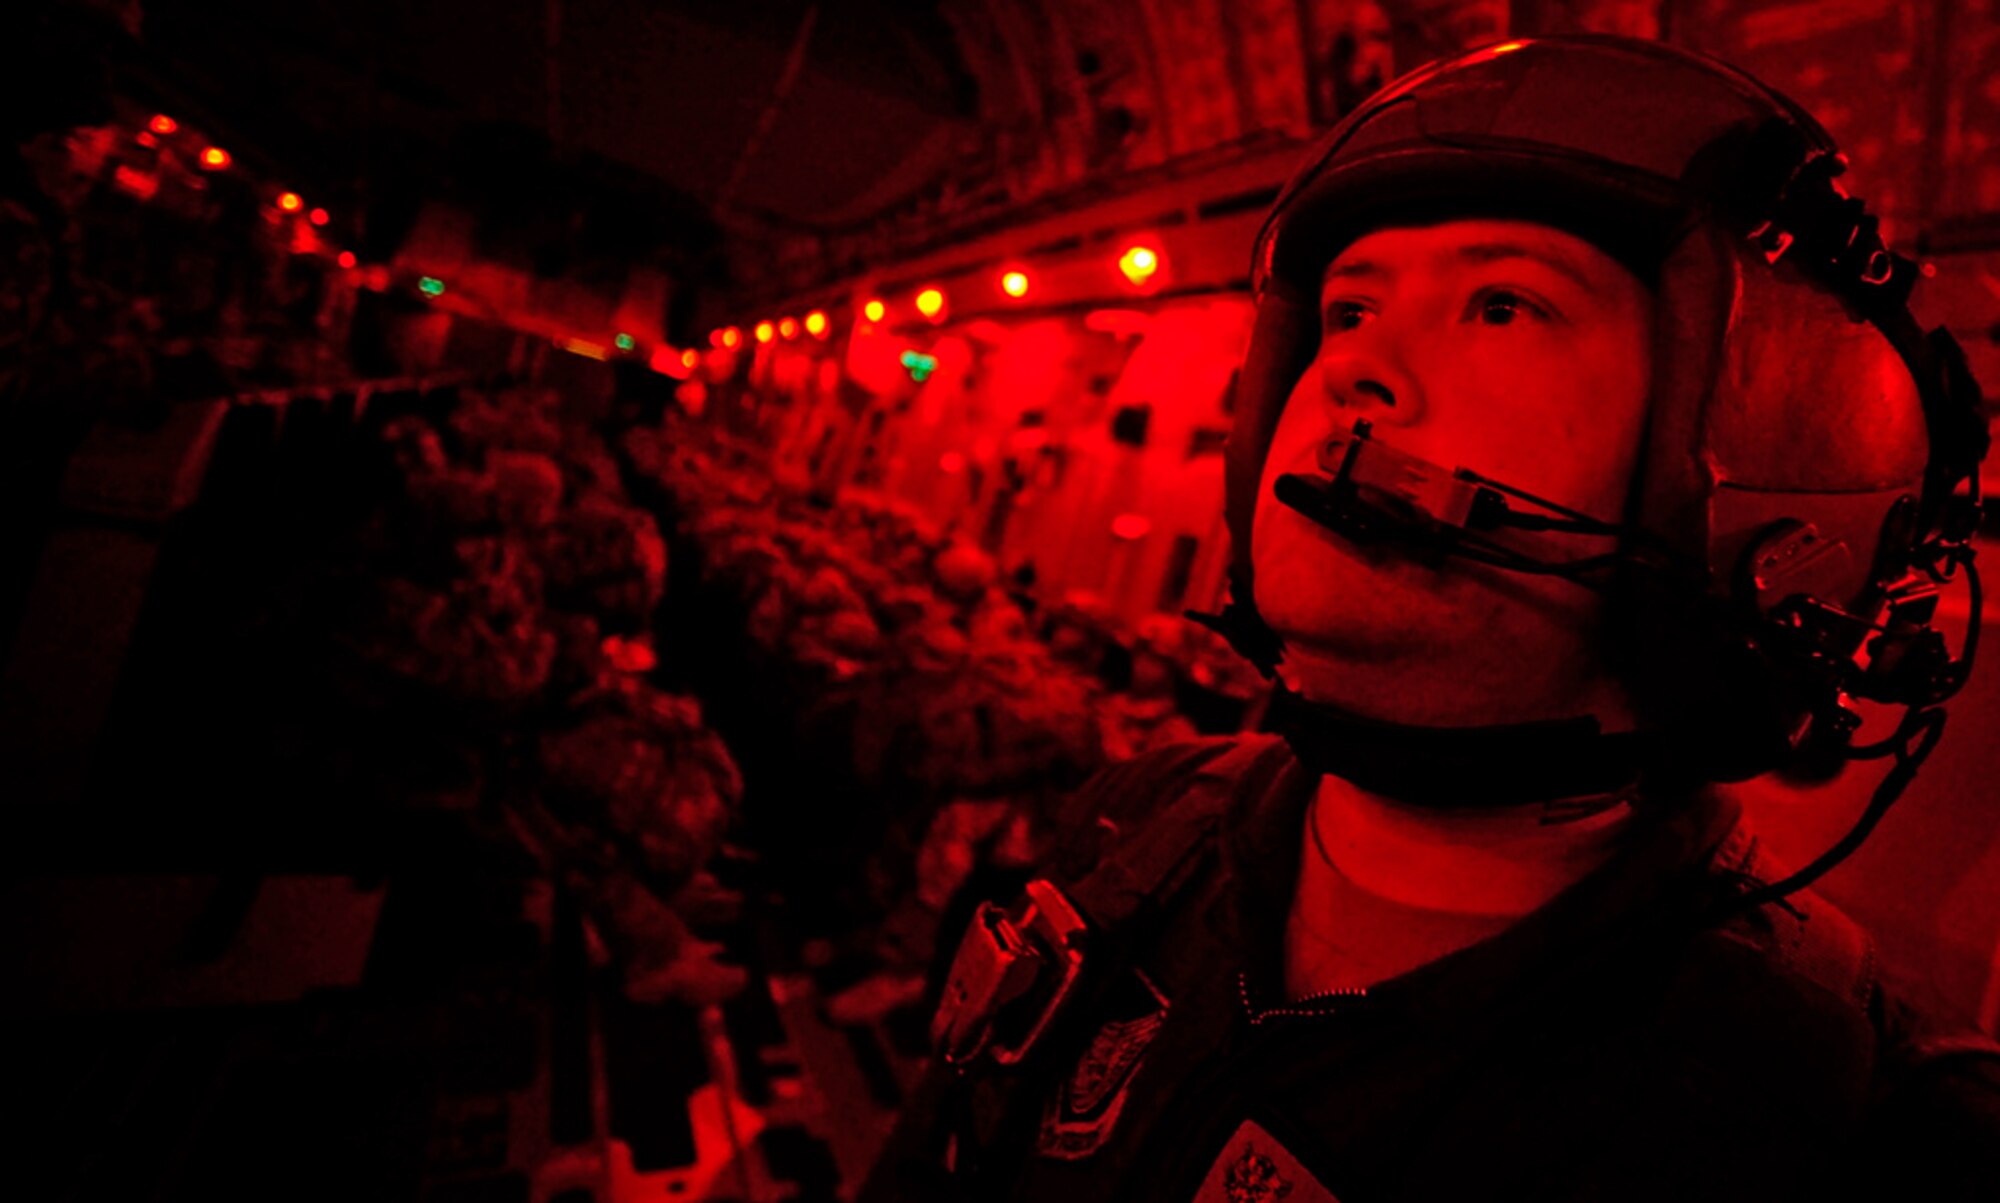 Staff Sgt. Lucas Crumpton waits for the "go" signal before an airborne insertion during Joint Forcible Entry Exercise Sept. 14, 2010, at Pope Air Force Base, N.C. The exercise is a training event held six times a year in order to enhance cohesiveness between the Air Force and Army by executing large scale, heavy equipment and troop movement for real-world contingencies. Crumpton is a C-17 Globemaster III loadmaster with the  535th Airlift Squadron from Hickam Air Force Base, H.I. (U.S. Air Force photo/Staff Sgt. Angelita M. Lawrence)